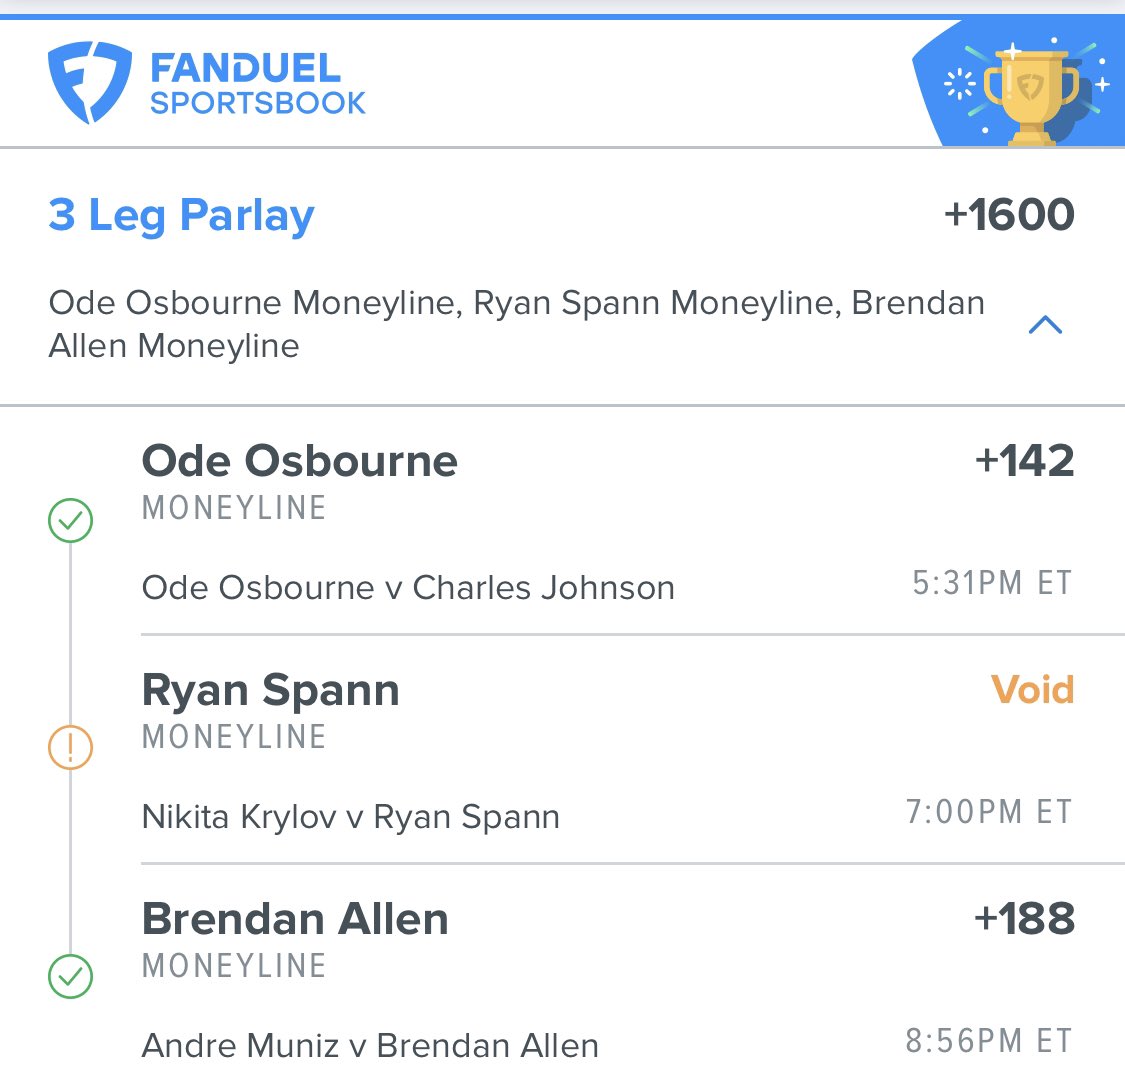 Really wanted to see Krylov Vs Spann but w.e. All and all a very decent Fight Night 👊🏾💯 #UFC #fanduelsportsbook #OdeOsbourne #BrendanAllen